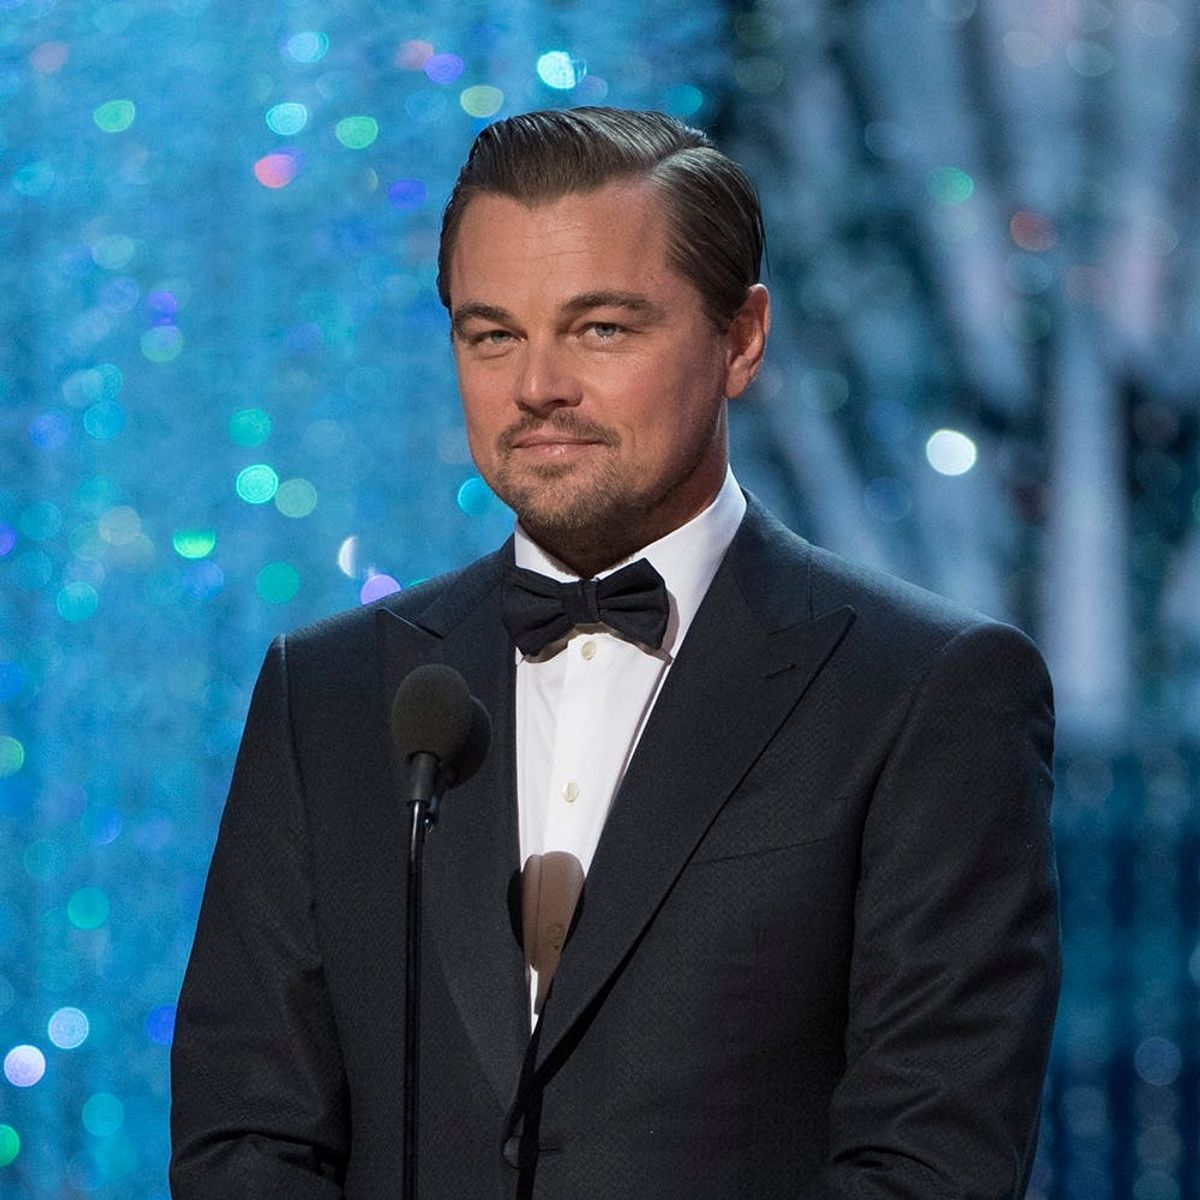 Leonardo DiCaprio Went to Some Extreme Lengths to Look Good at the Oscars